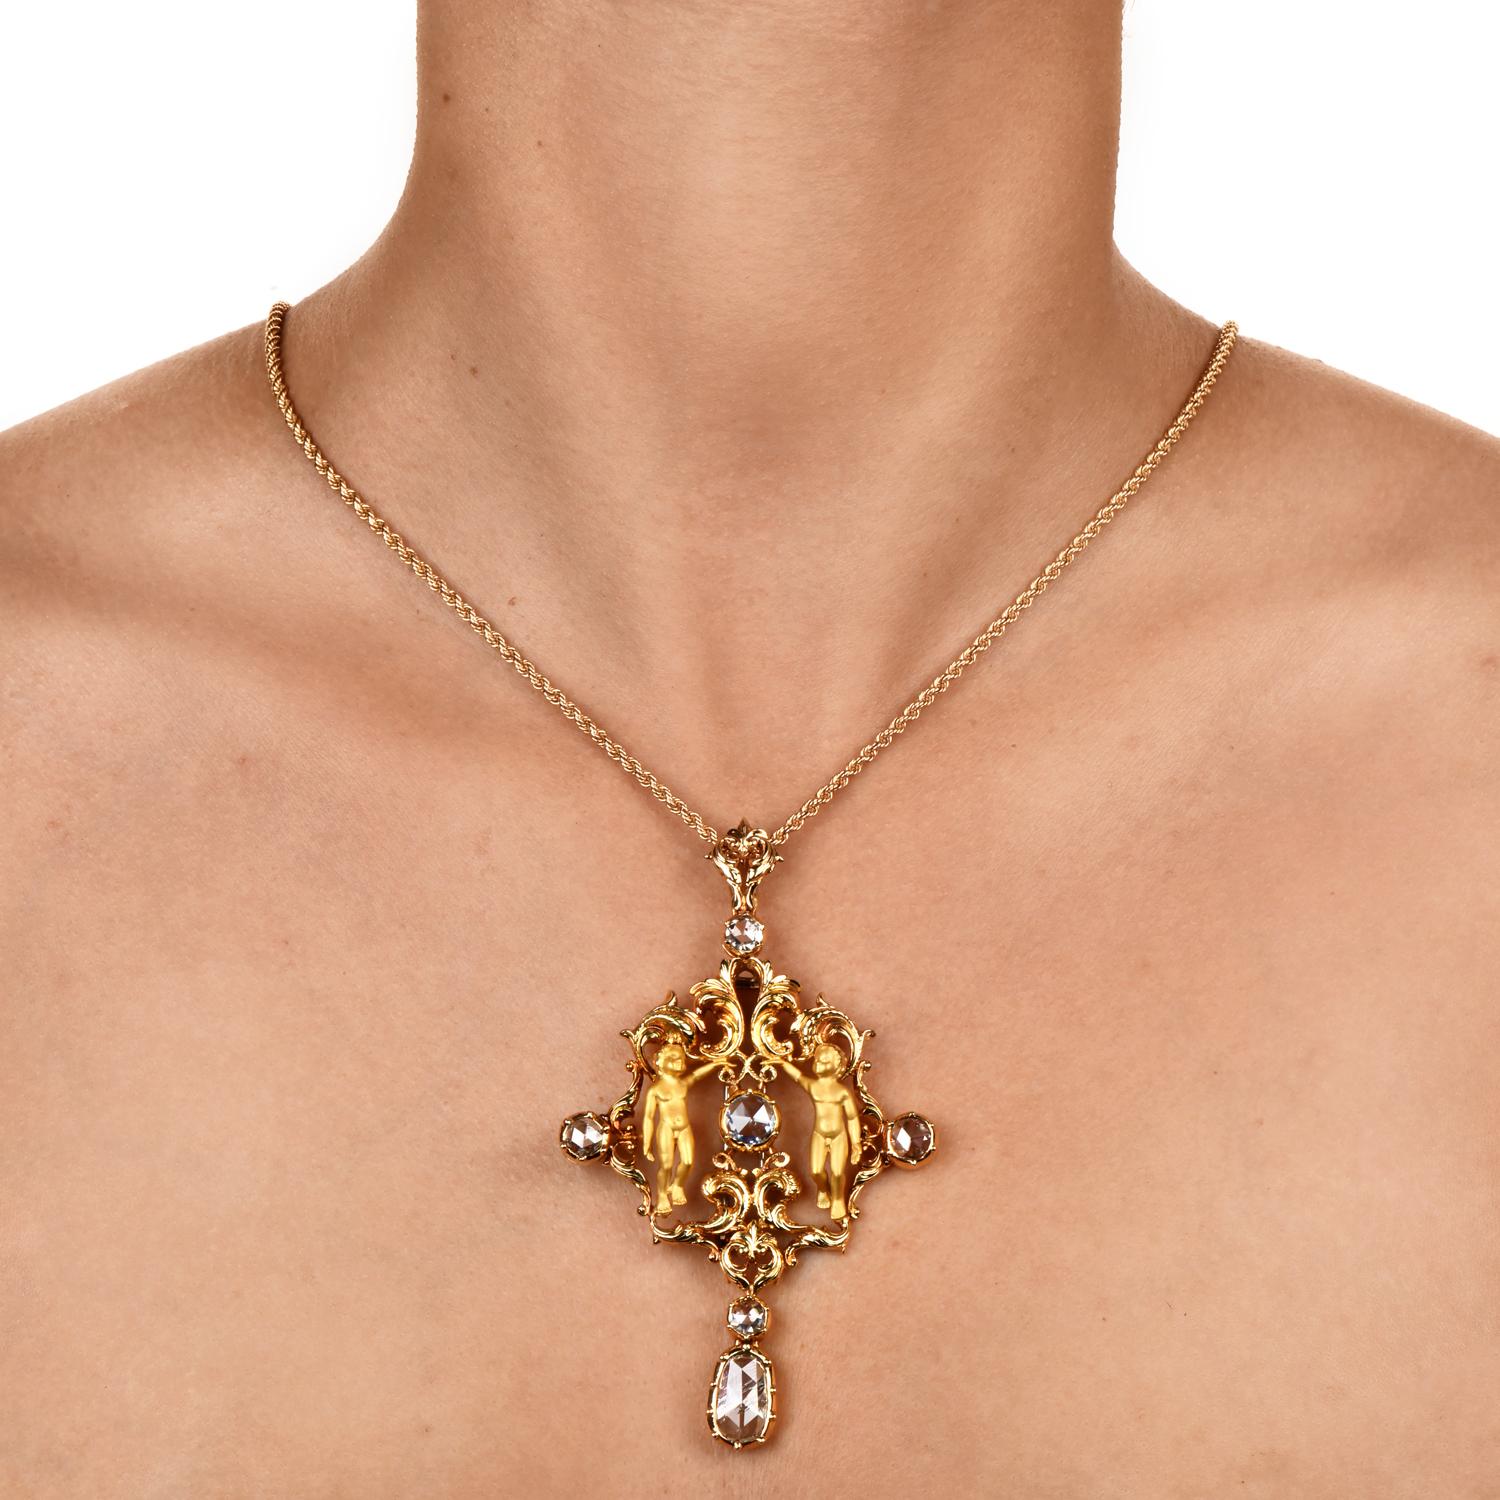 Exquisite highly collectible Carrera Y Carrera, a high display of craftmanship, featuring two twin boys' figurines, representing the Zodiac sign of Gemini.

This one-of-kind Carrera Carrera pendant is Crafted in solid 18K yellow gold with a satin